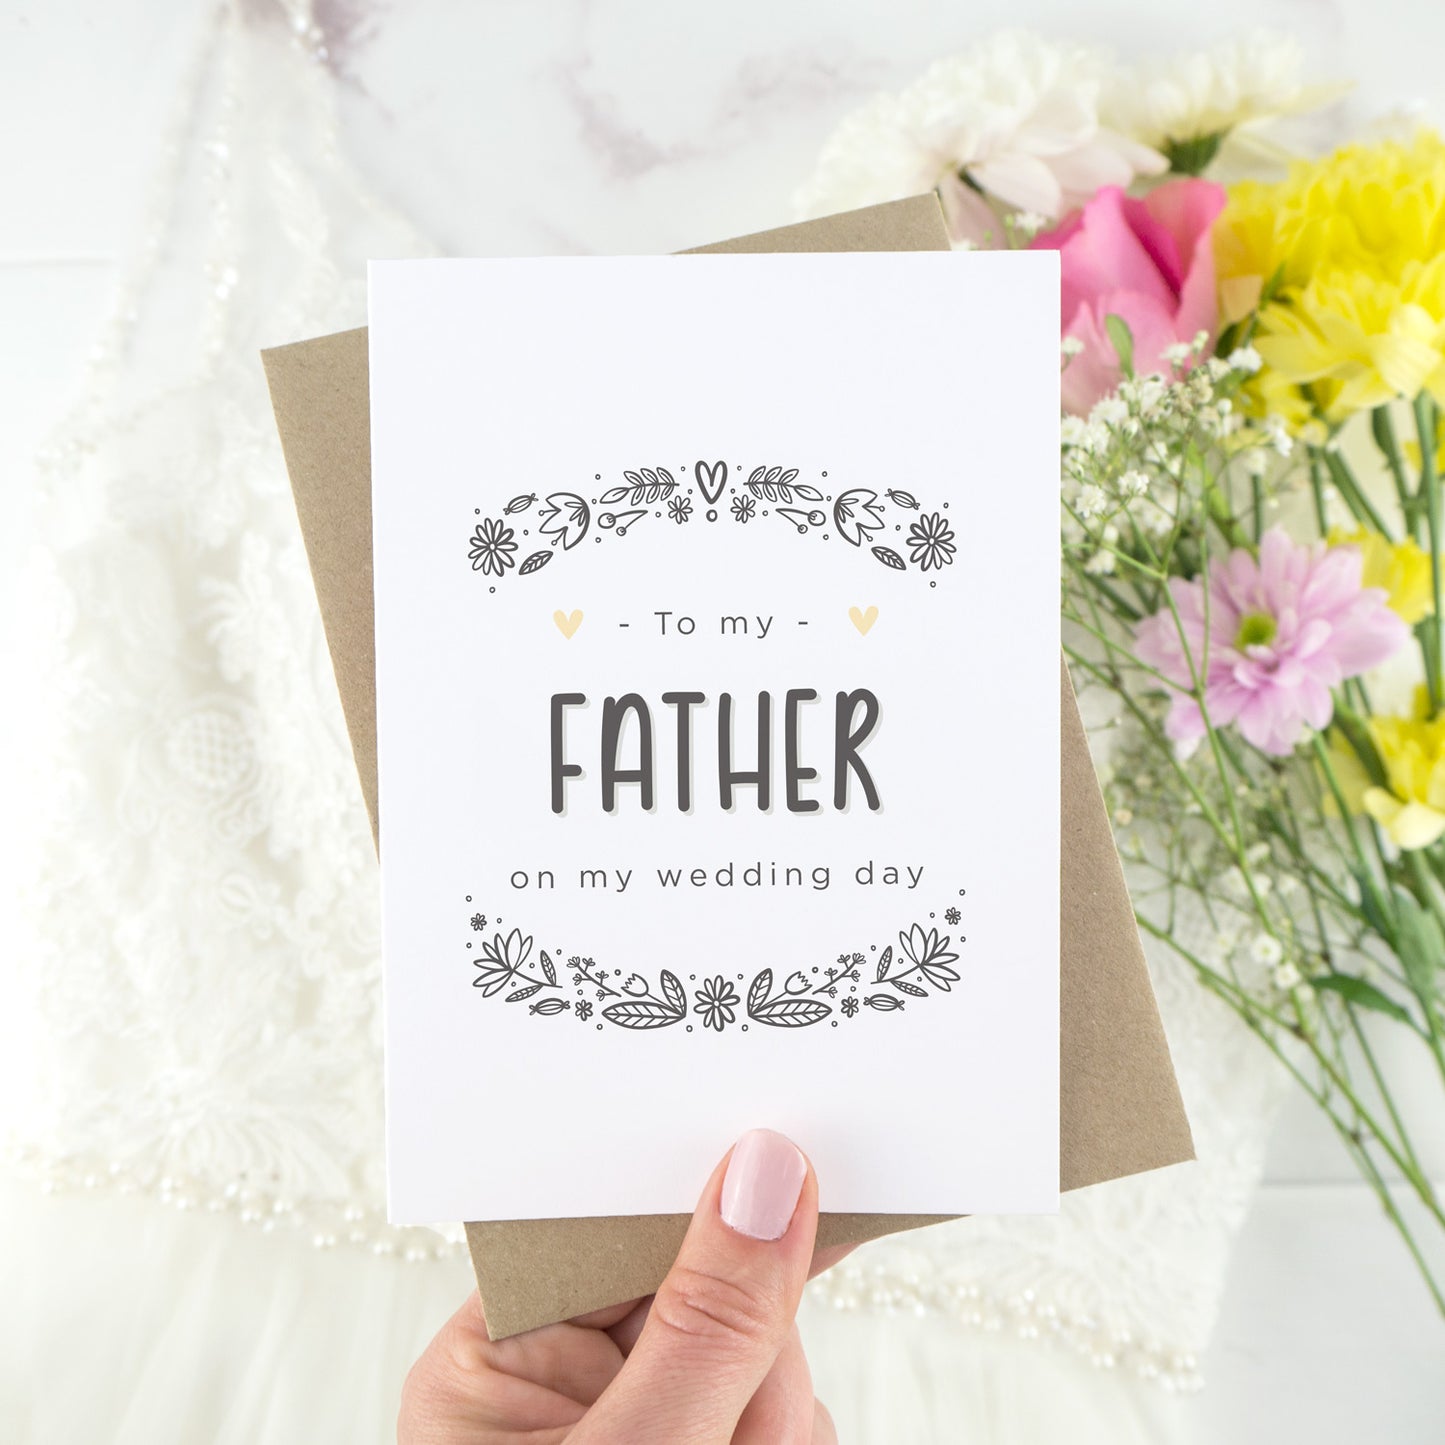 To my father on my wedding day. A white card with grey hand drawn lettering, and a grey floral border. The image features a wedding dress and bouquet of flowers.